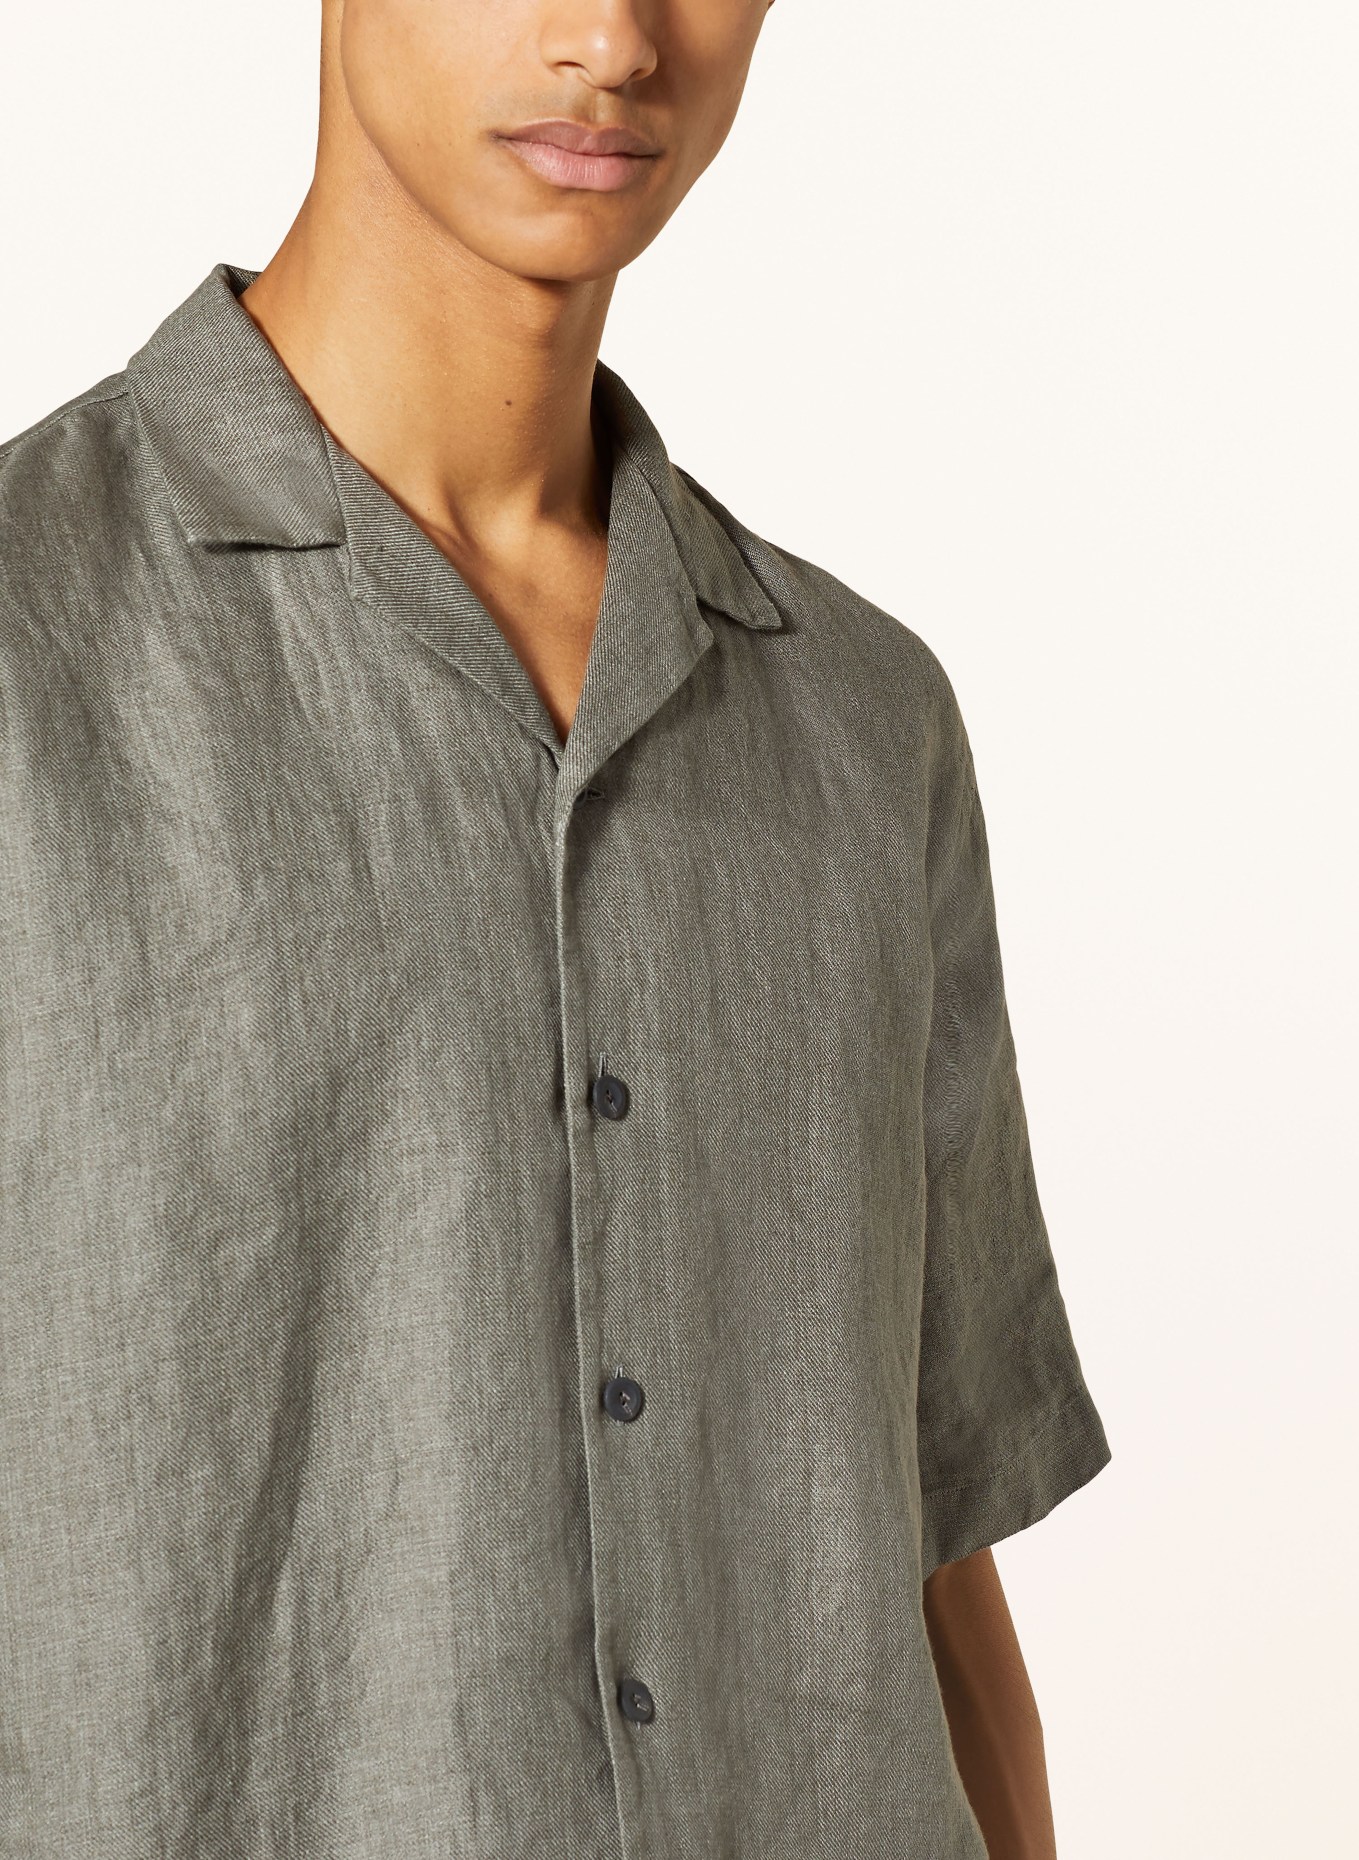 ETON Resort shirt relaxed fit made of linen, Color: GRAY (Image 4)